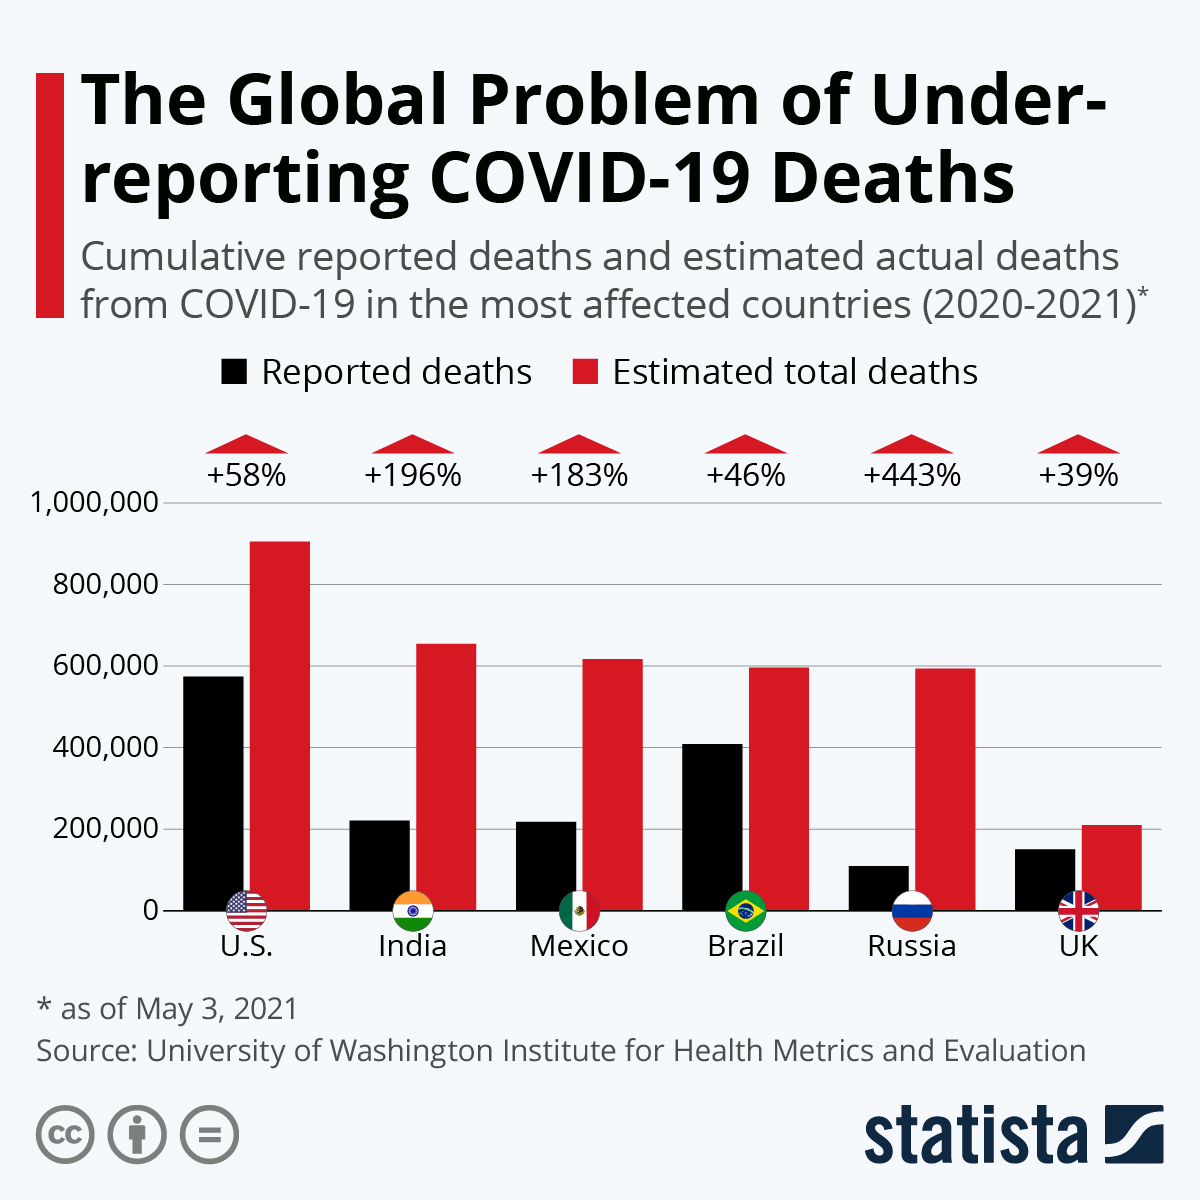 The Global Problem of Under-reporting COVID-19 Deaths